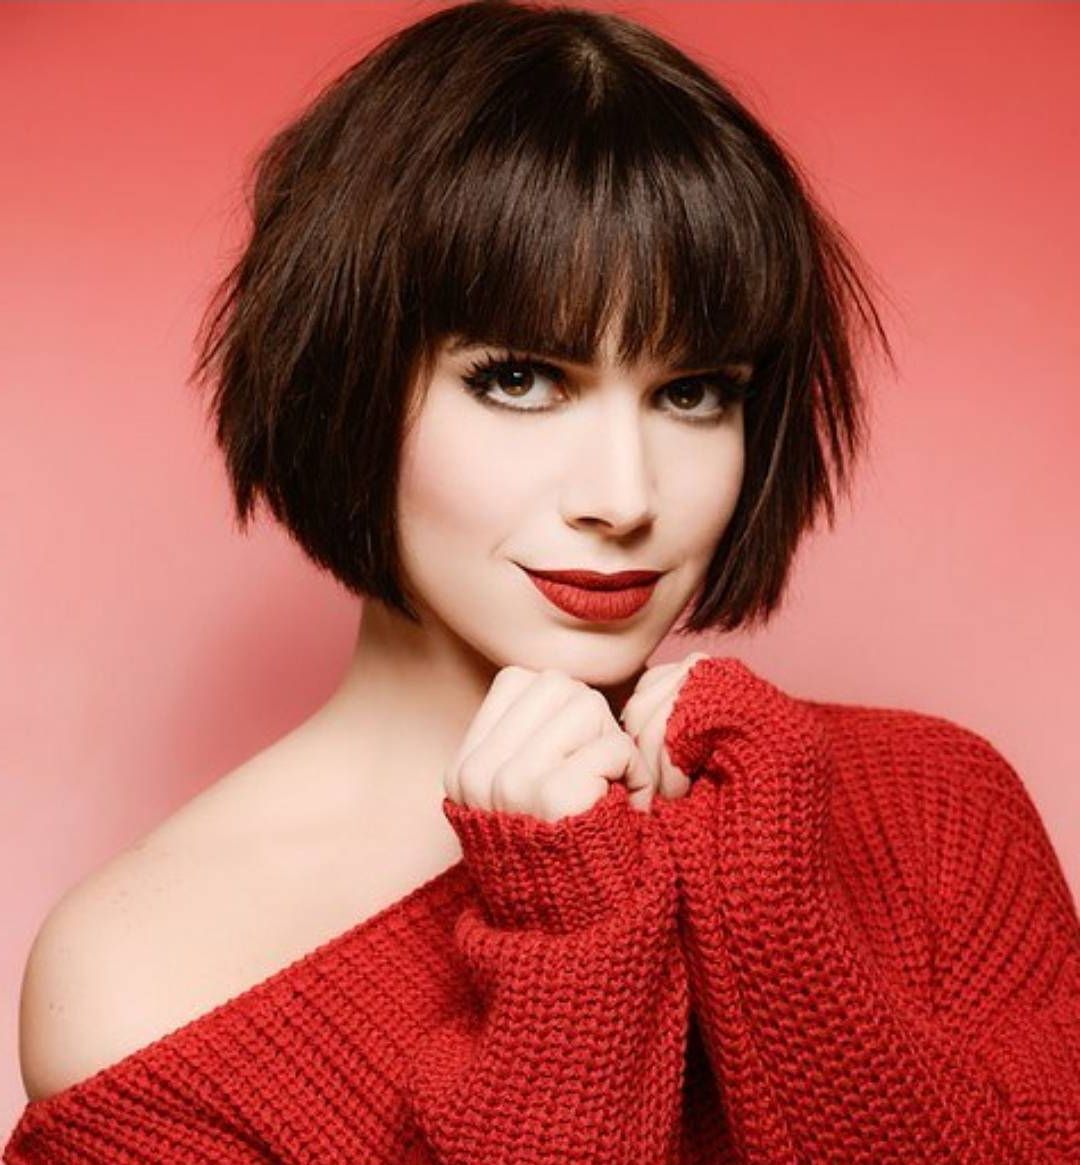 10 Chic Short Bob Haircuts That Balance Your Face Shape! Regarding Straight Bob Hairstyles With Bangs (View 9 of 20)